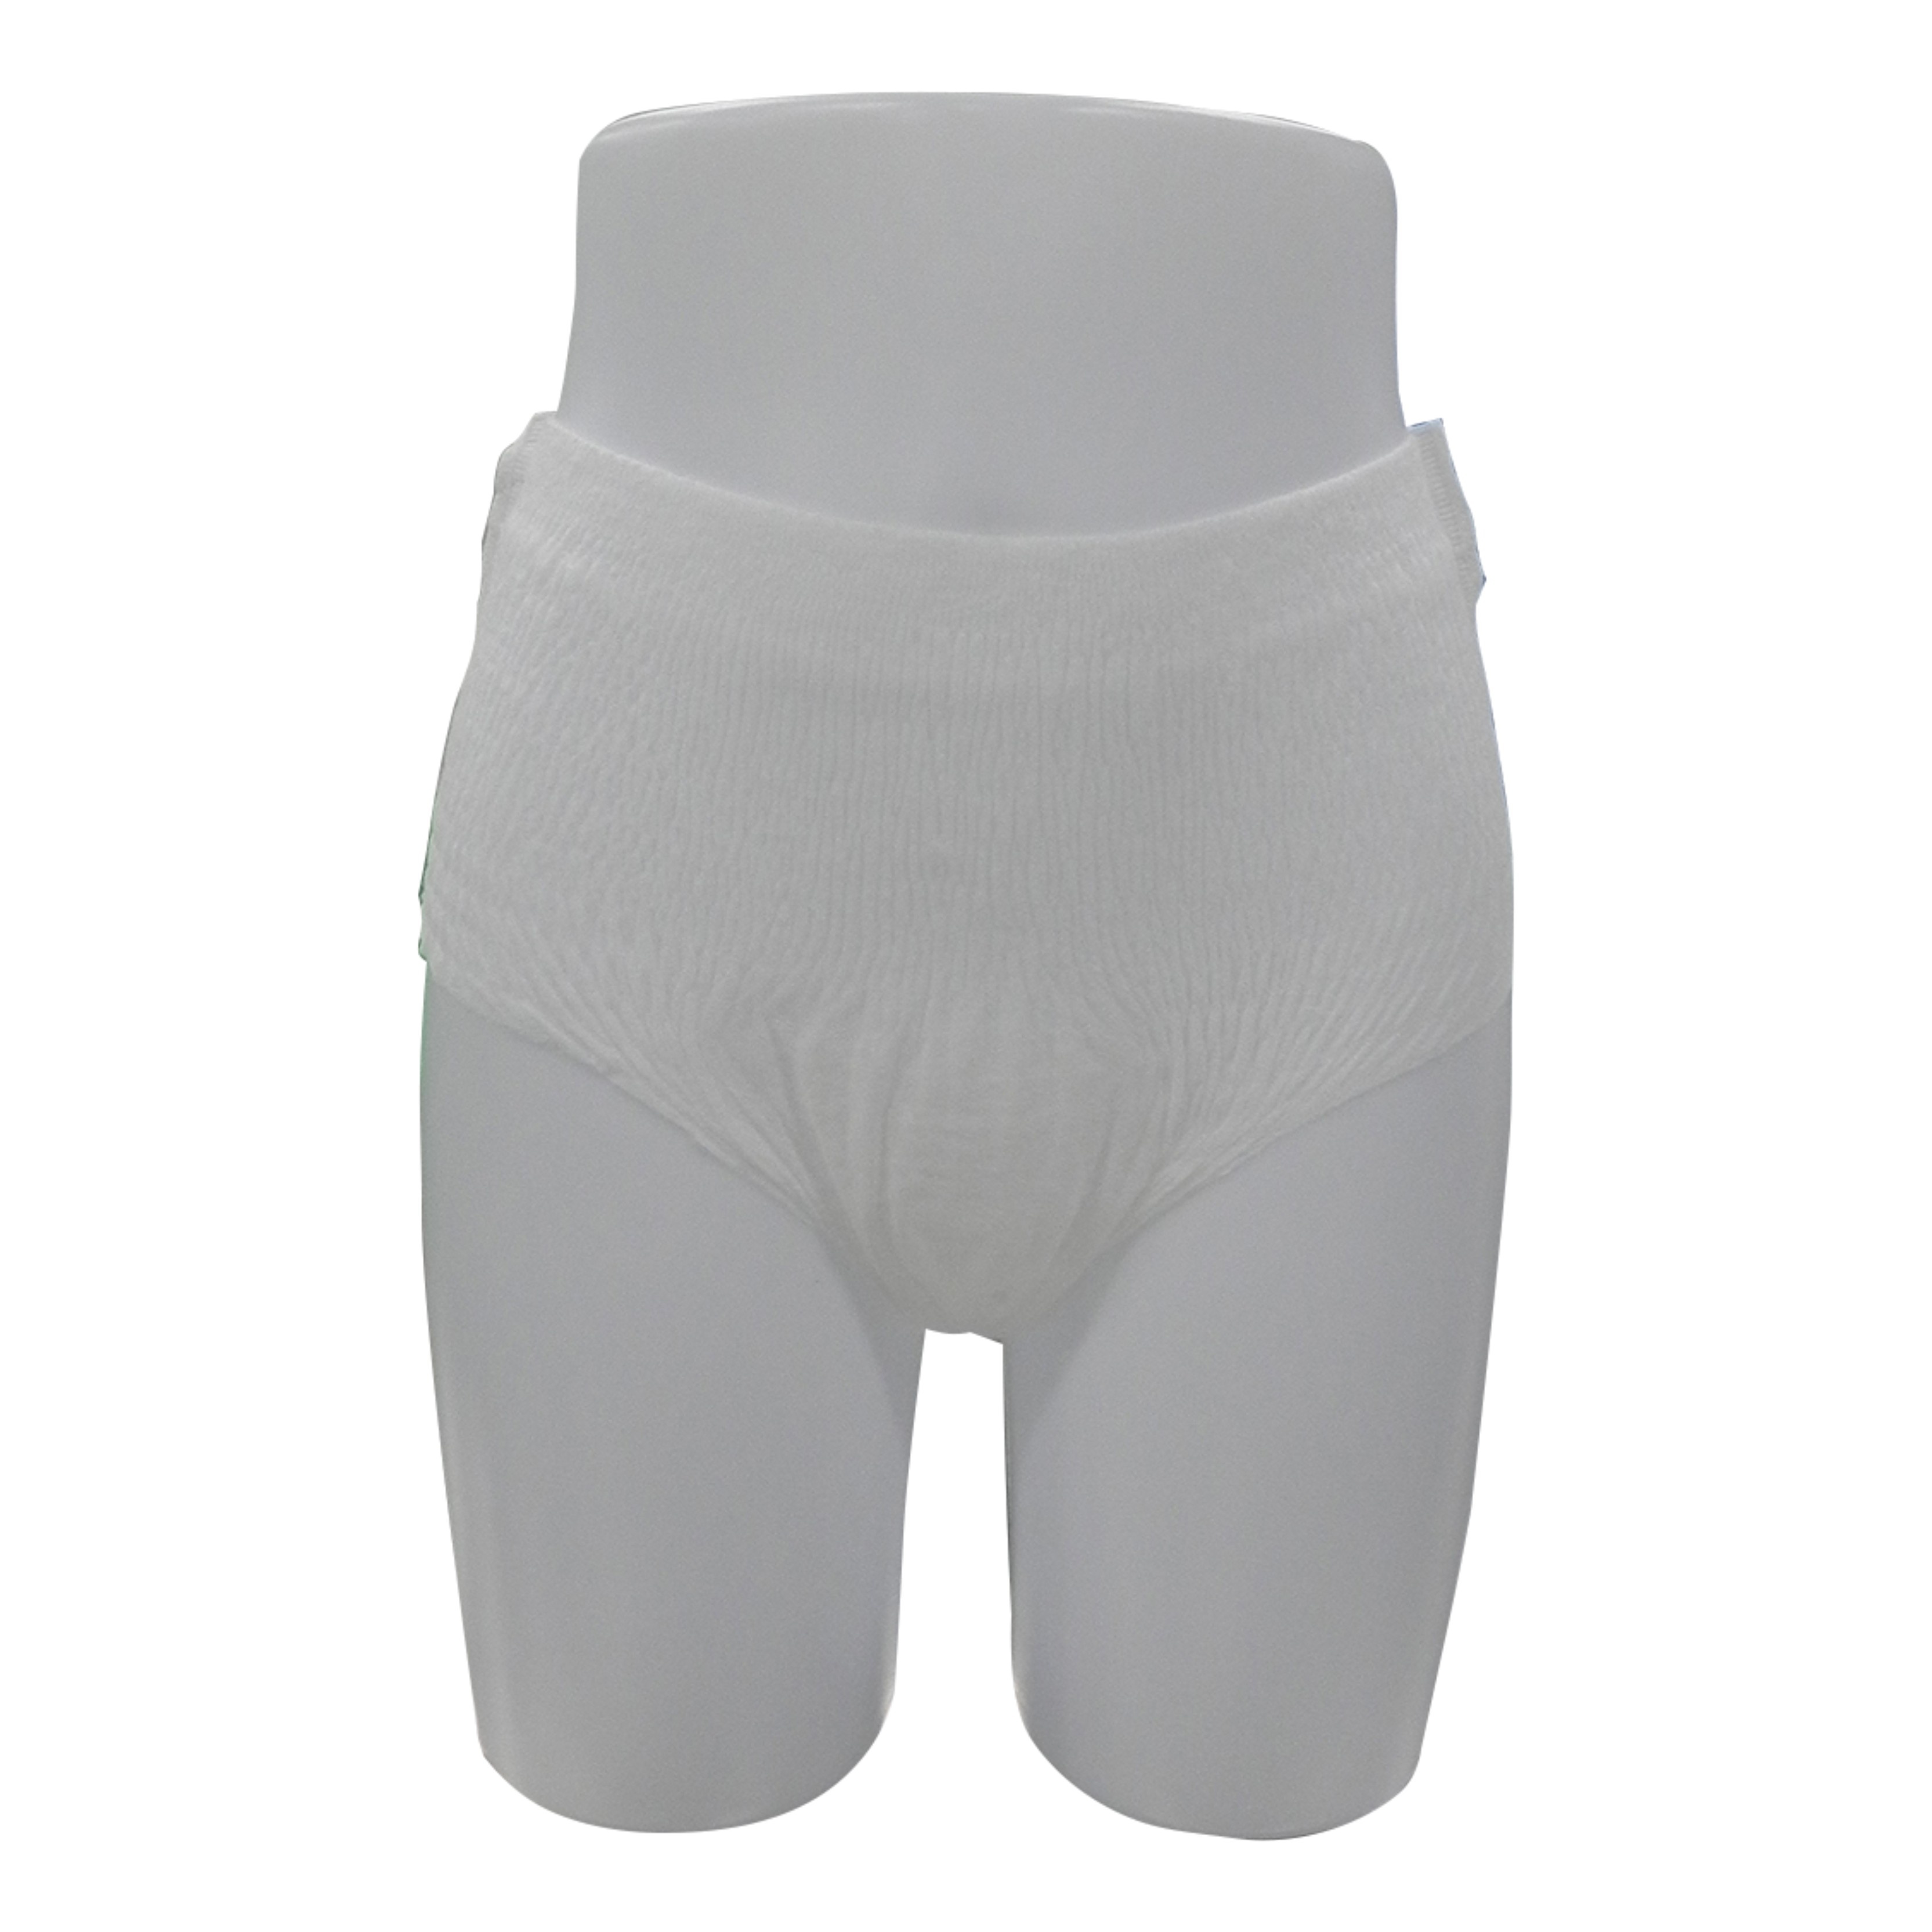 super sleepy lady women sanitary napkins female period pants in pull up style Featured Image